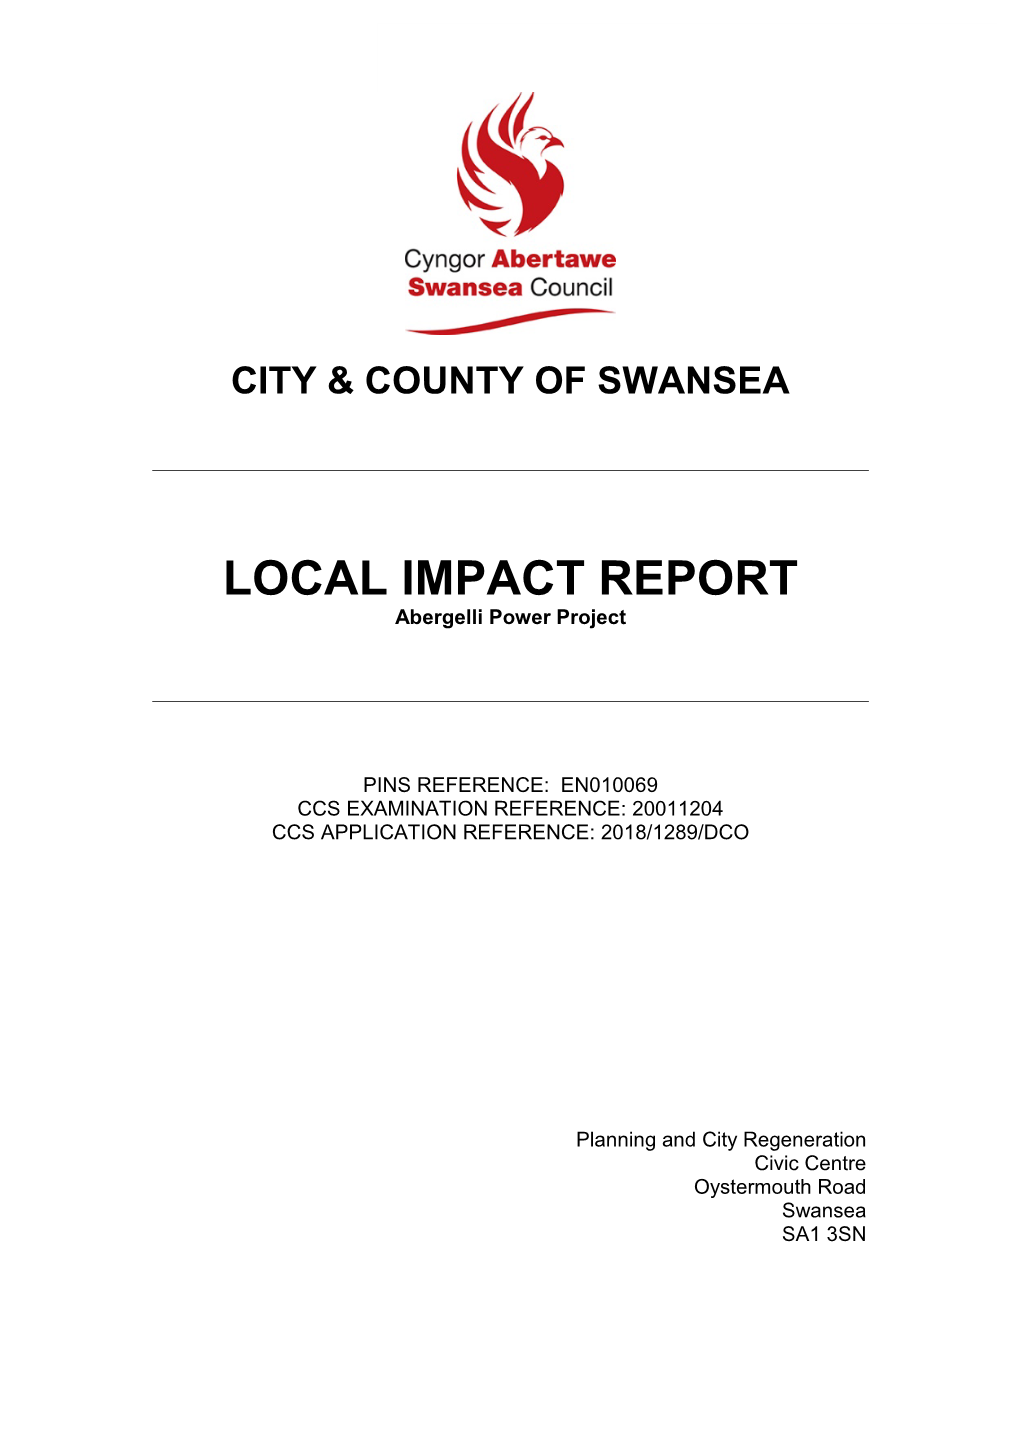 City & Council of Swansea